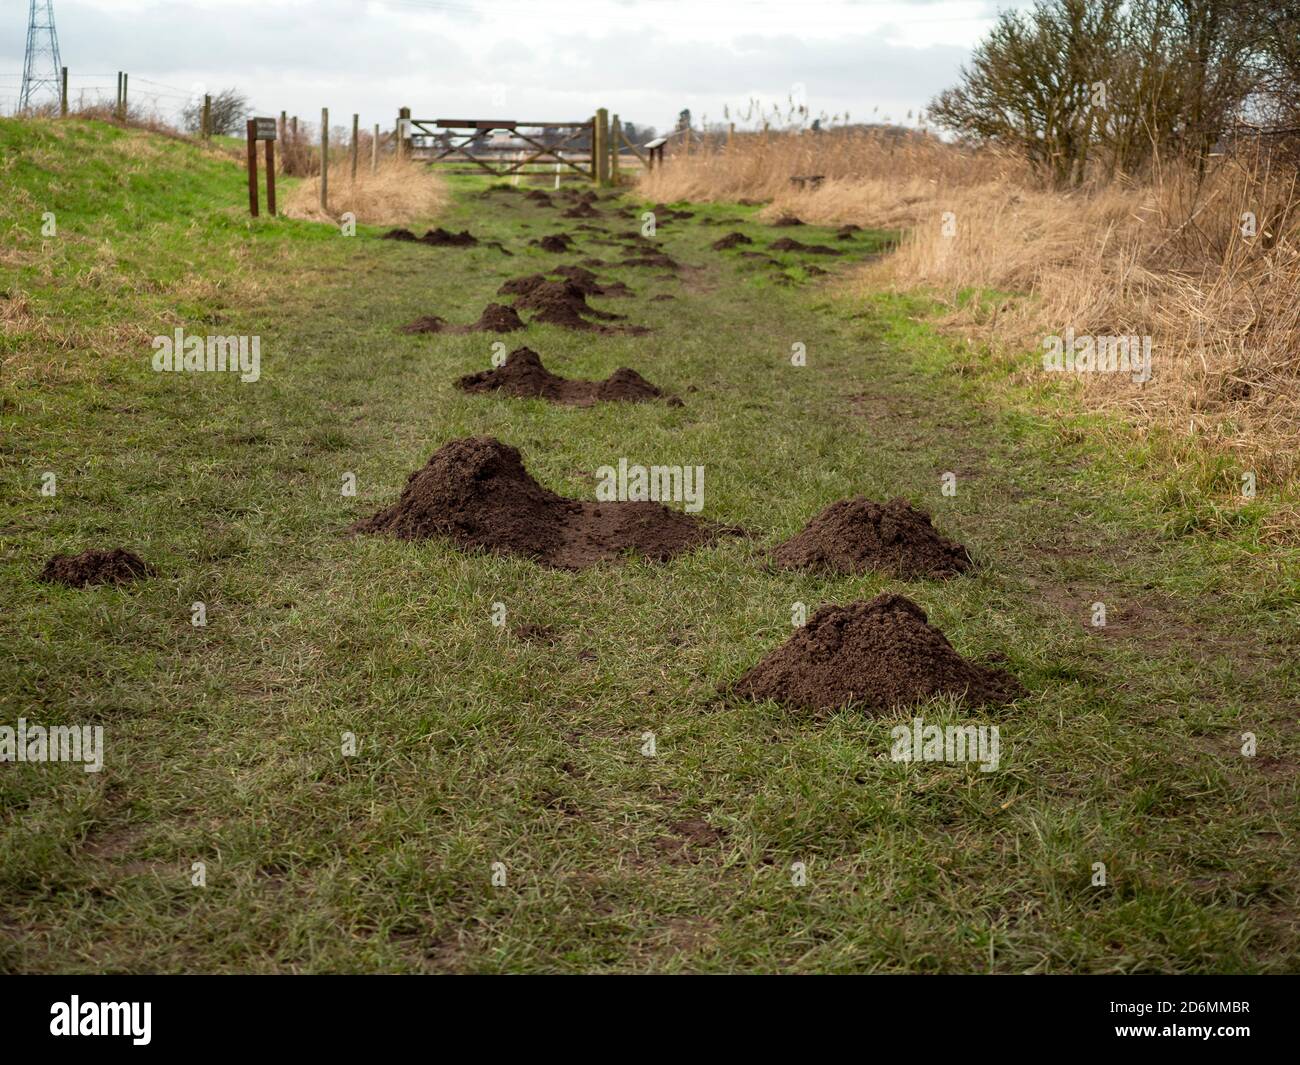 Numerous molehills in a grass countryside lane leading towards a wooden gate Stock Photo